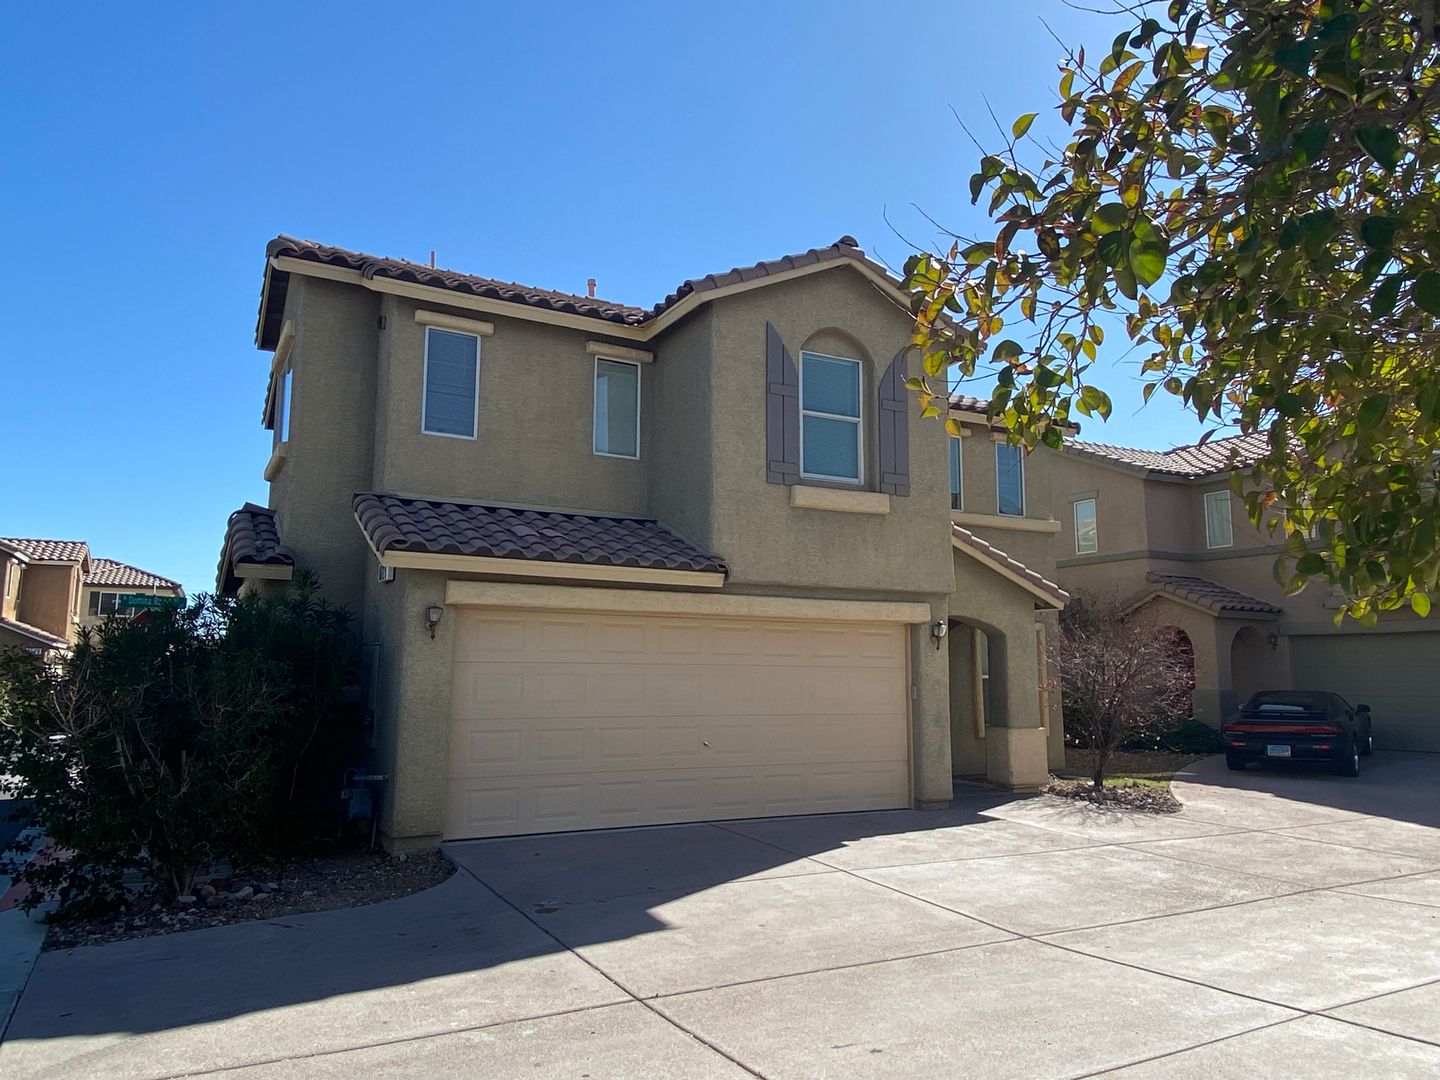 4 bed/2.5 bath home located in the SW area of Las Vegas